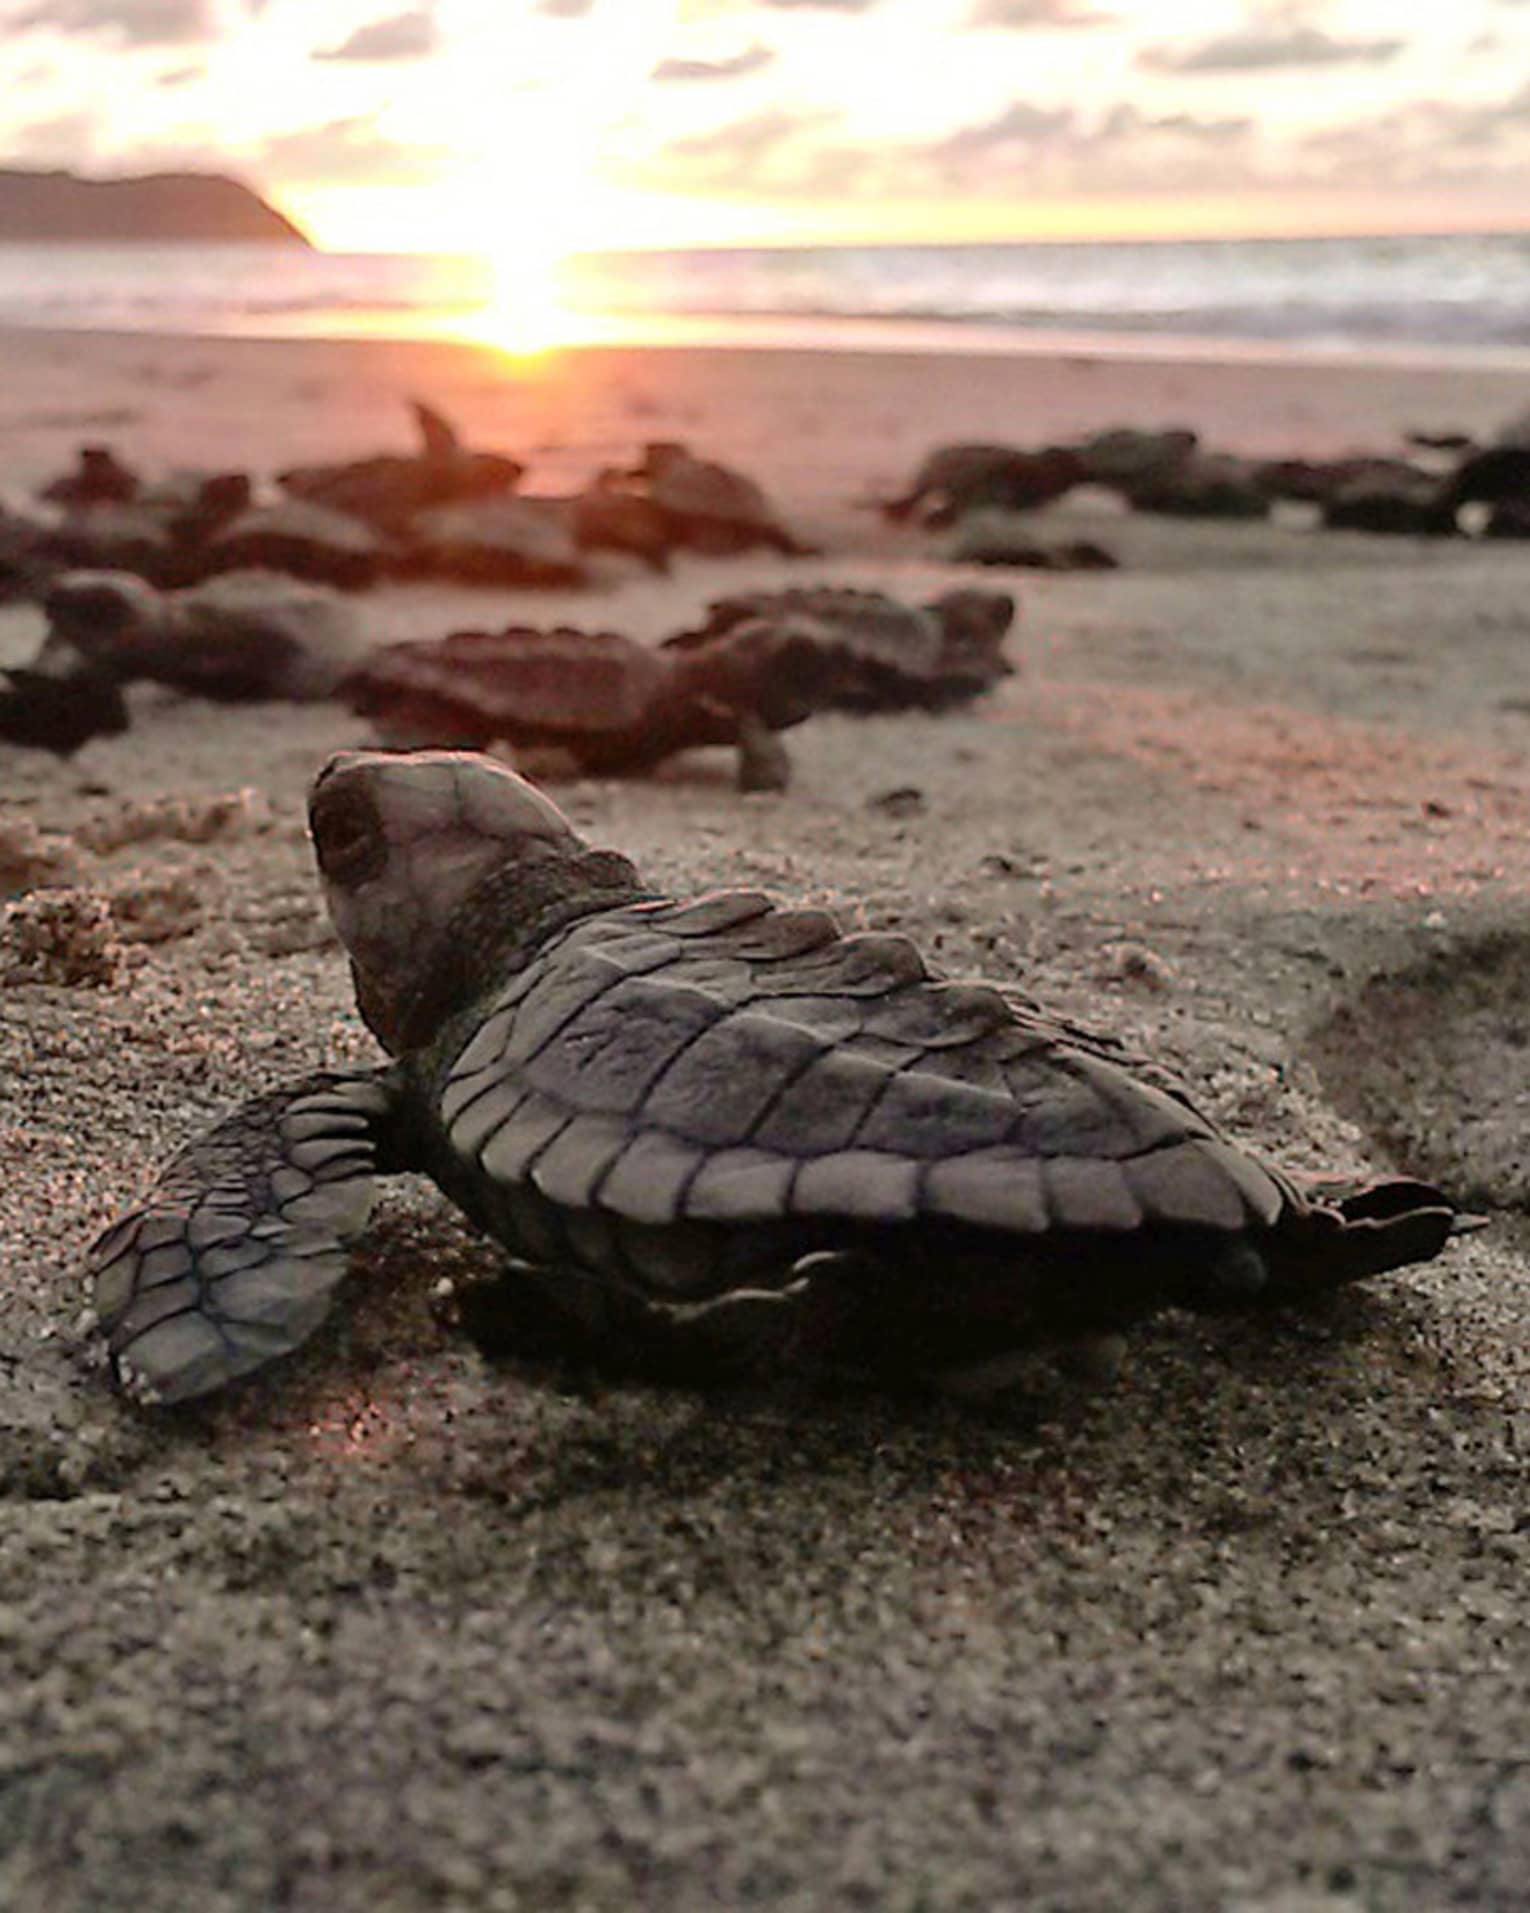 This image depicts a group of baby sea turtles moving on a beach with the sun in the distance, and is connected to ESG and sustainability